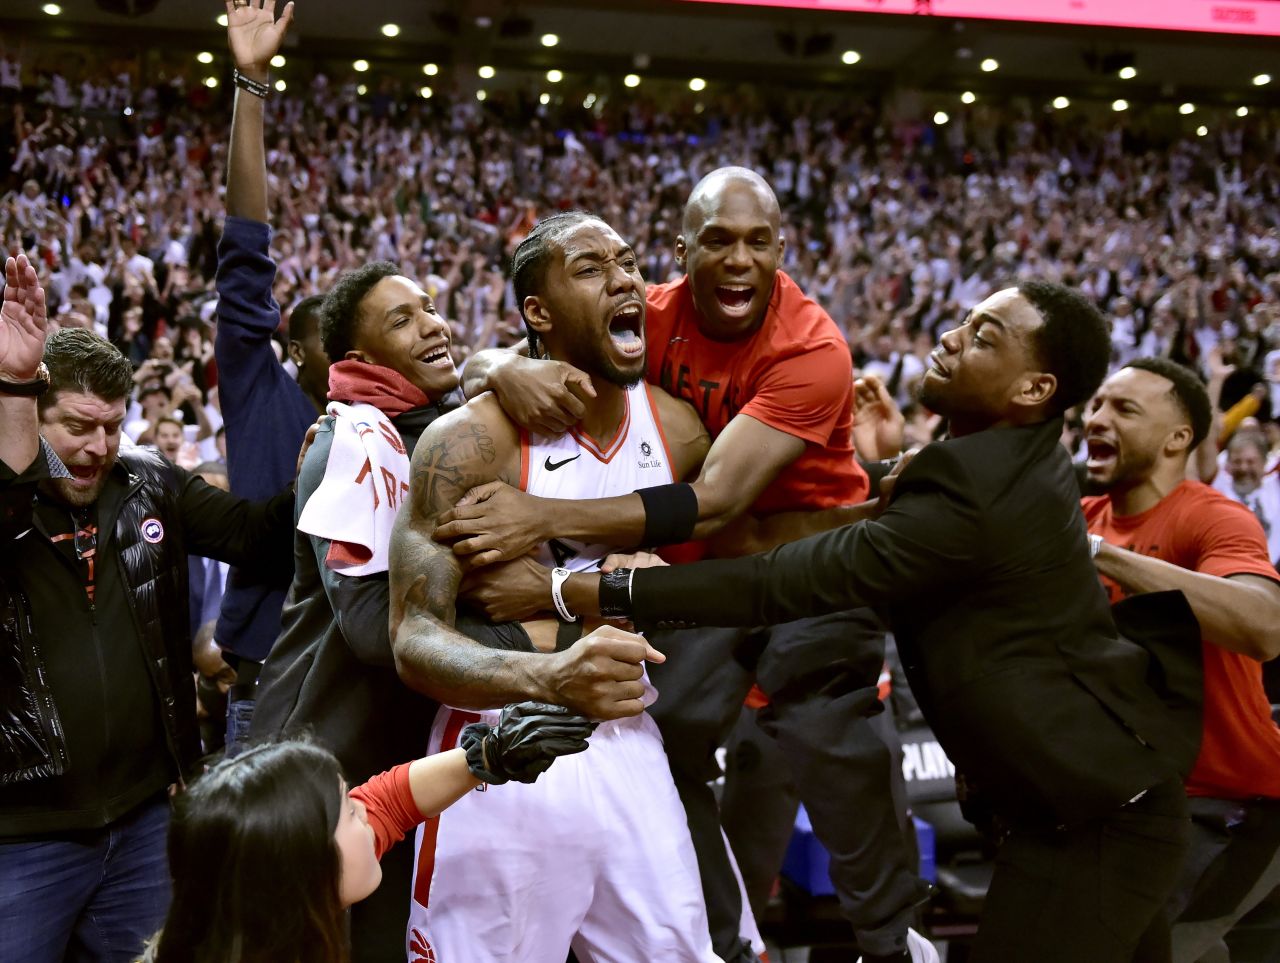 Toronto Raptors forward Kawhi Leonard, center, celebrates his game-winning basket as time expired at the end of an NBA Eastern Conference semifinal basketball game against the Philadelphia 76ers, in Toronto on Sunday, May 12. Toronto won 92-90.